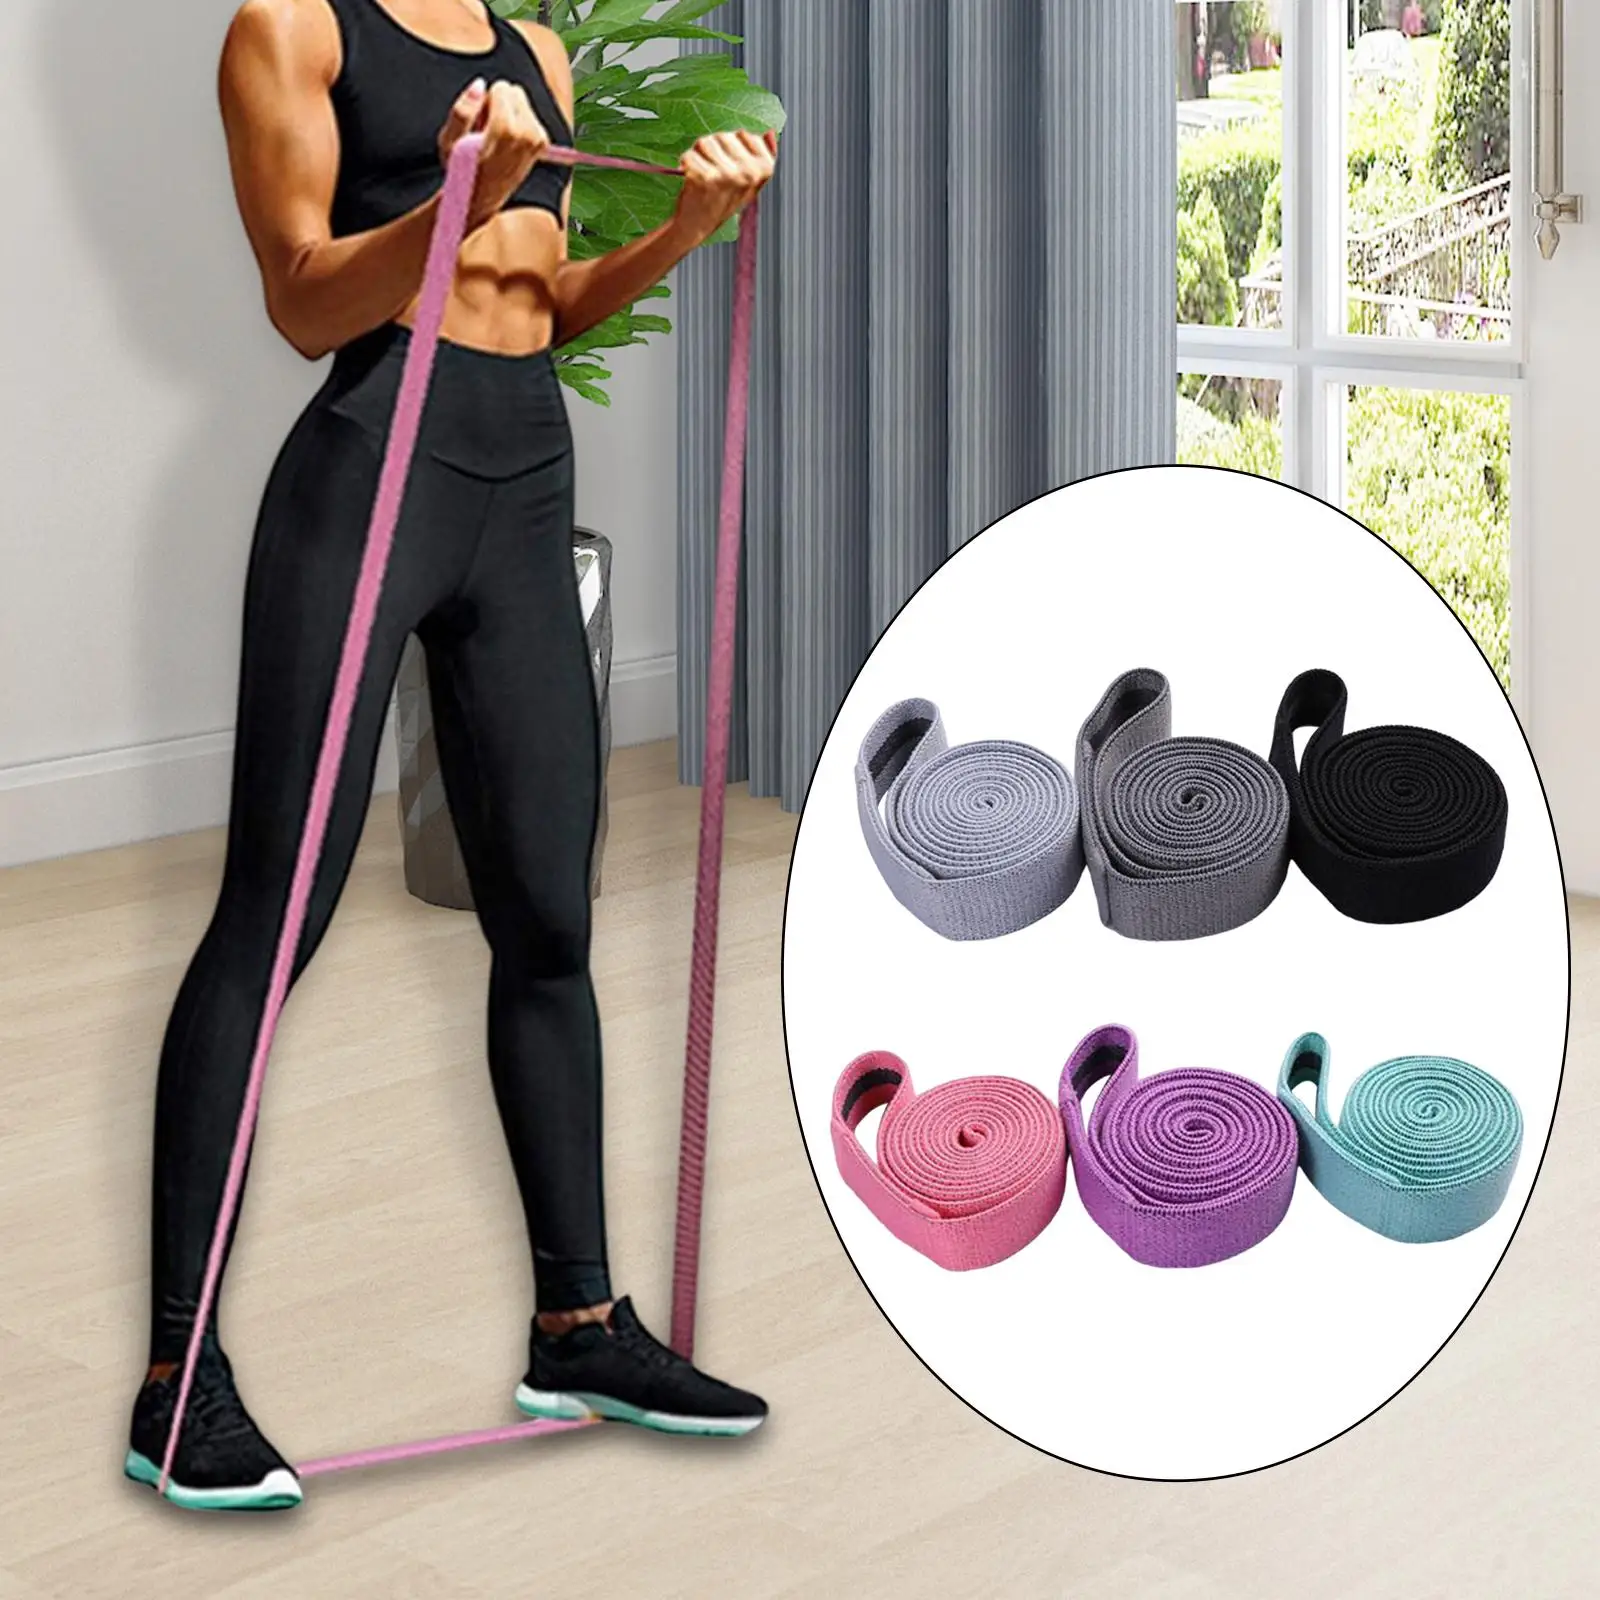 3Pcs Resistance Bands Set Pull up Assistance Bands Workout Loop Band Heavy Duty 3 Different Levels for Body Stretching Fitness